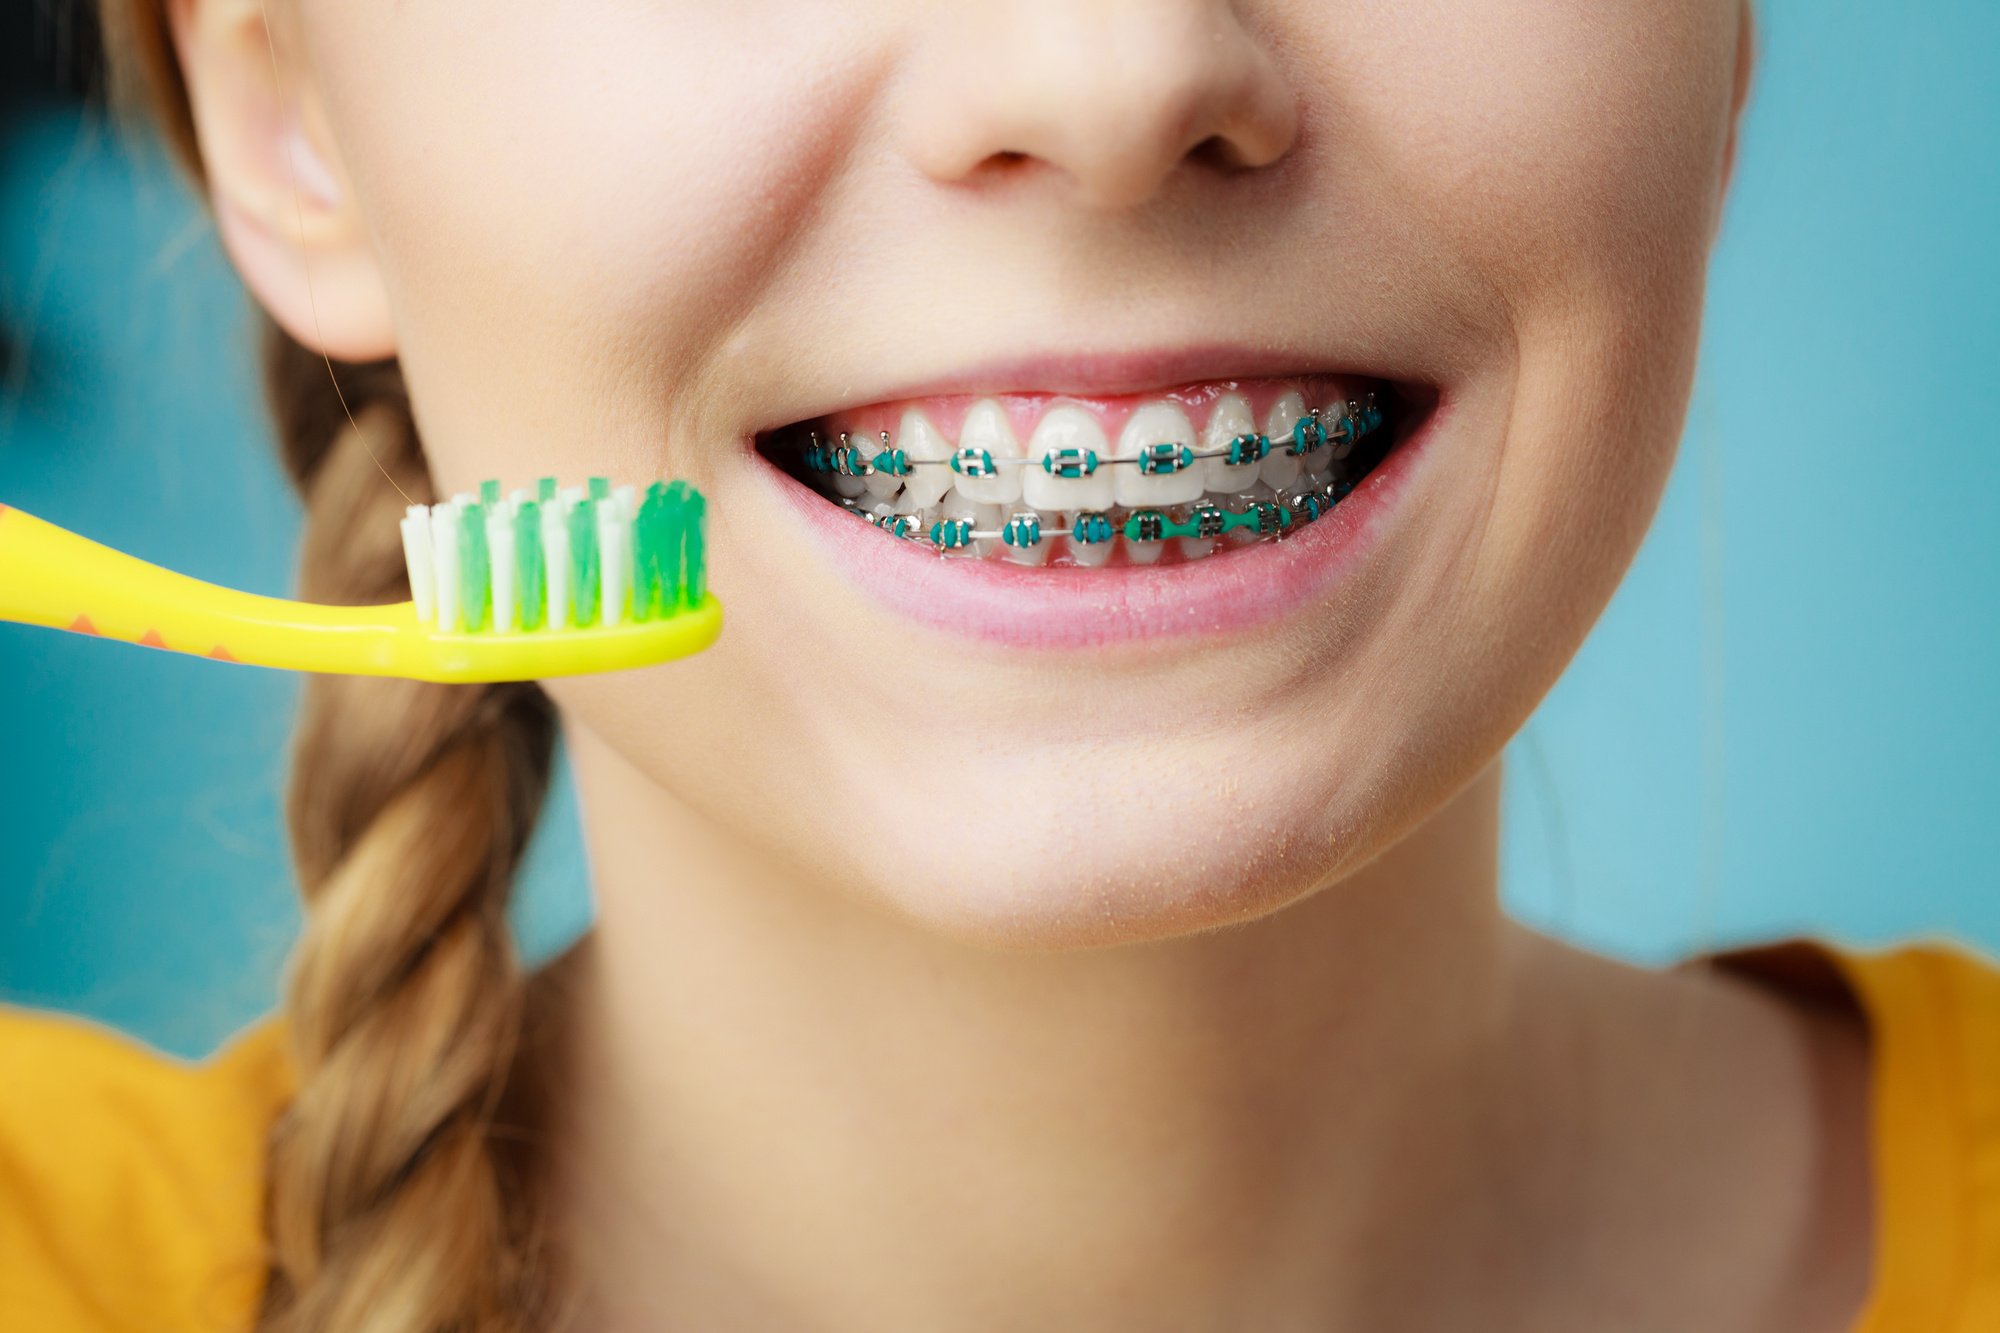 How to Find the Best Toothbrush for Braces